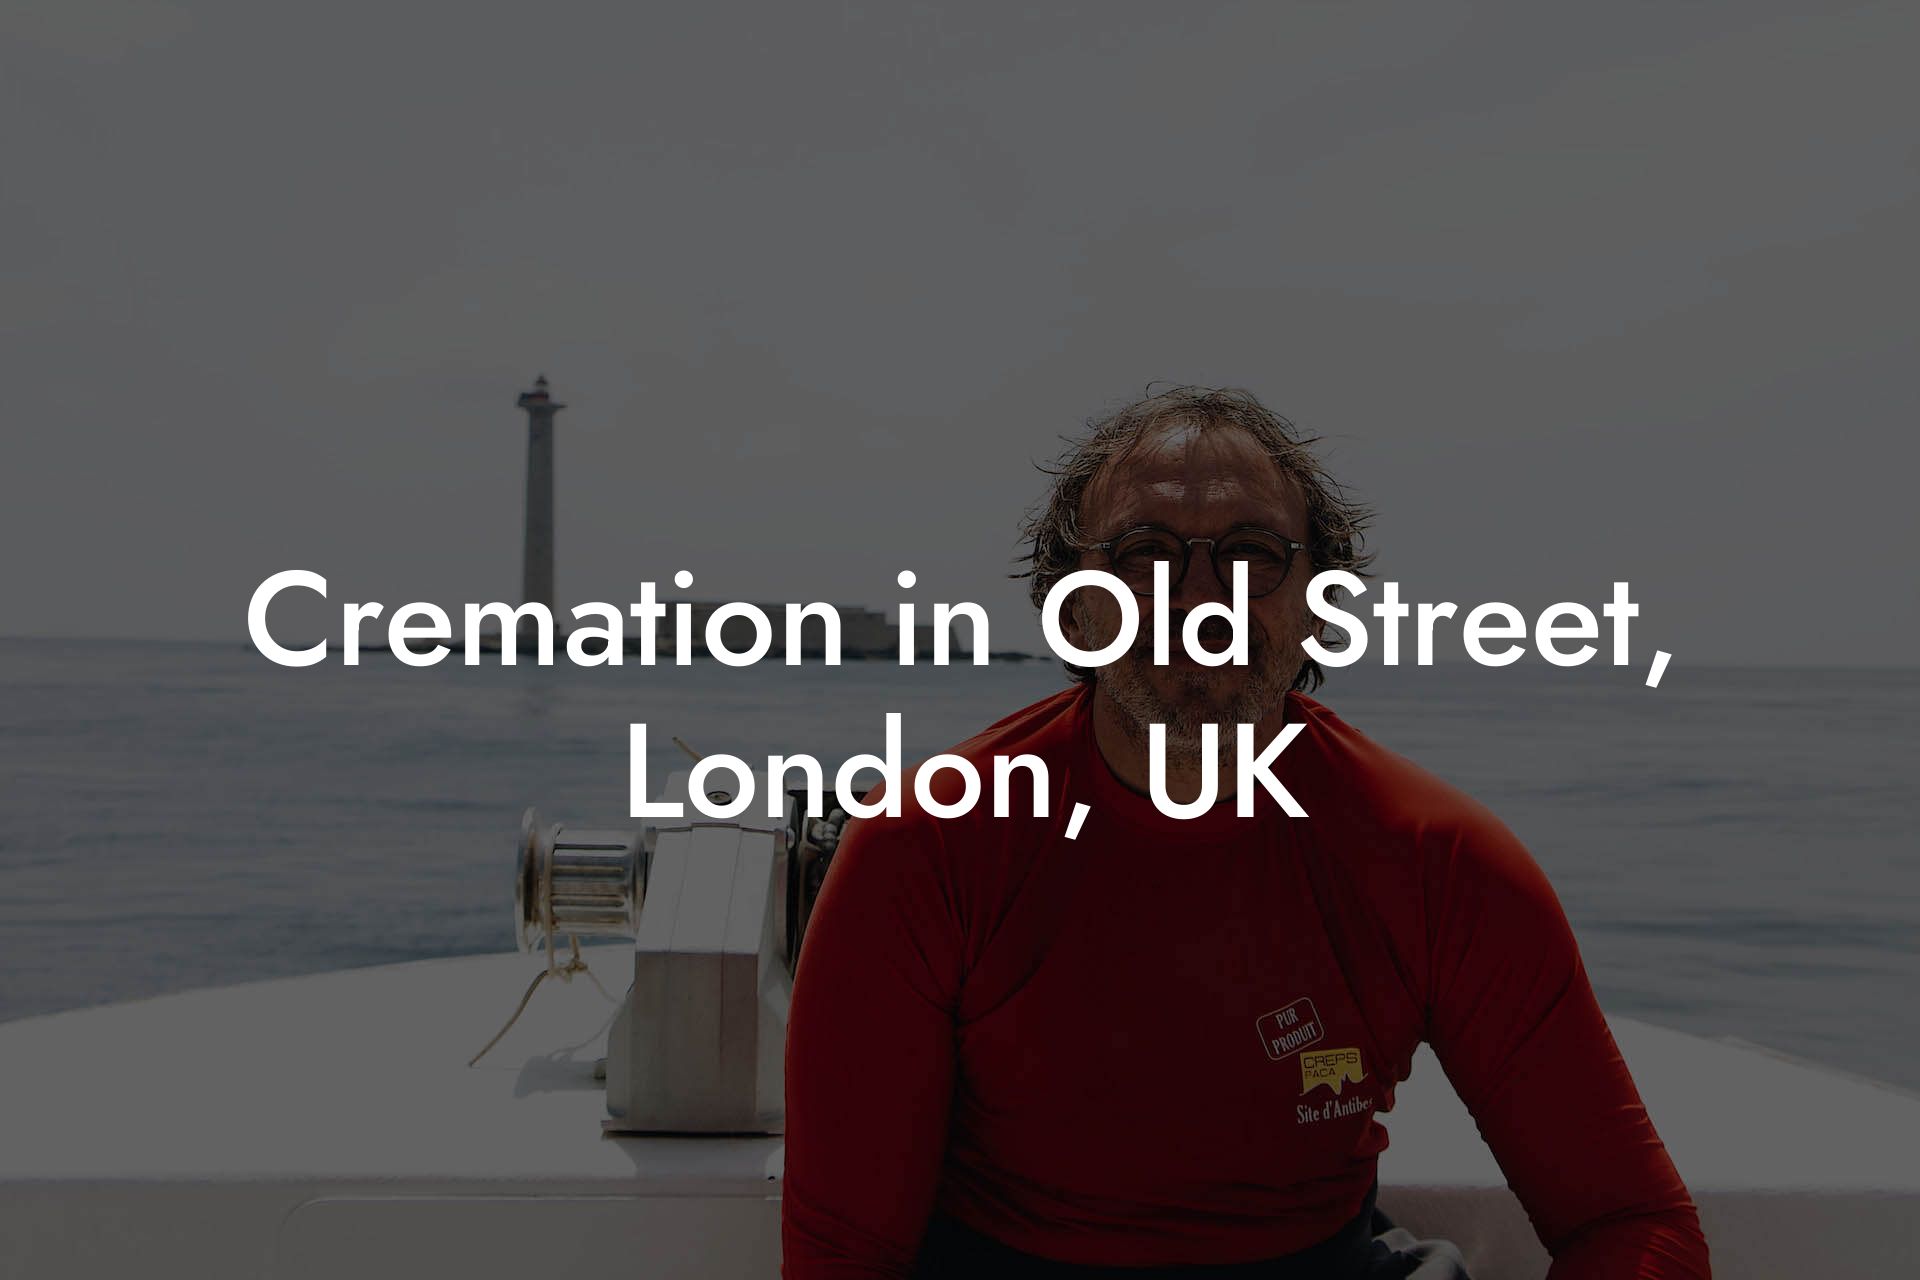 Cremation in Old Street, London, UK